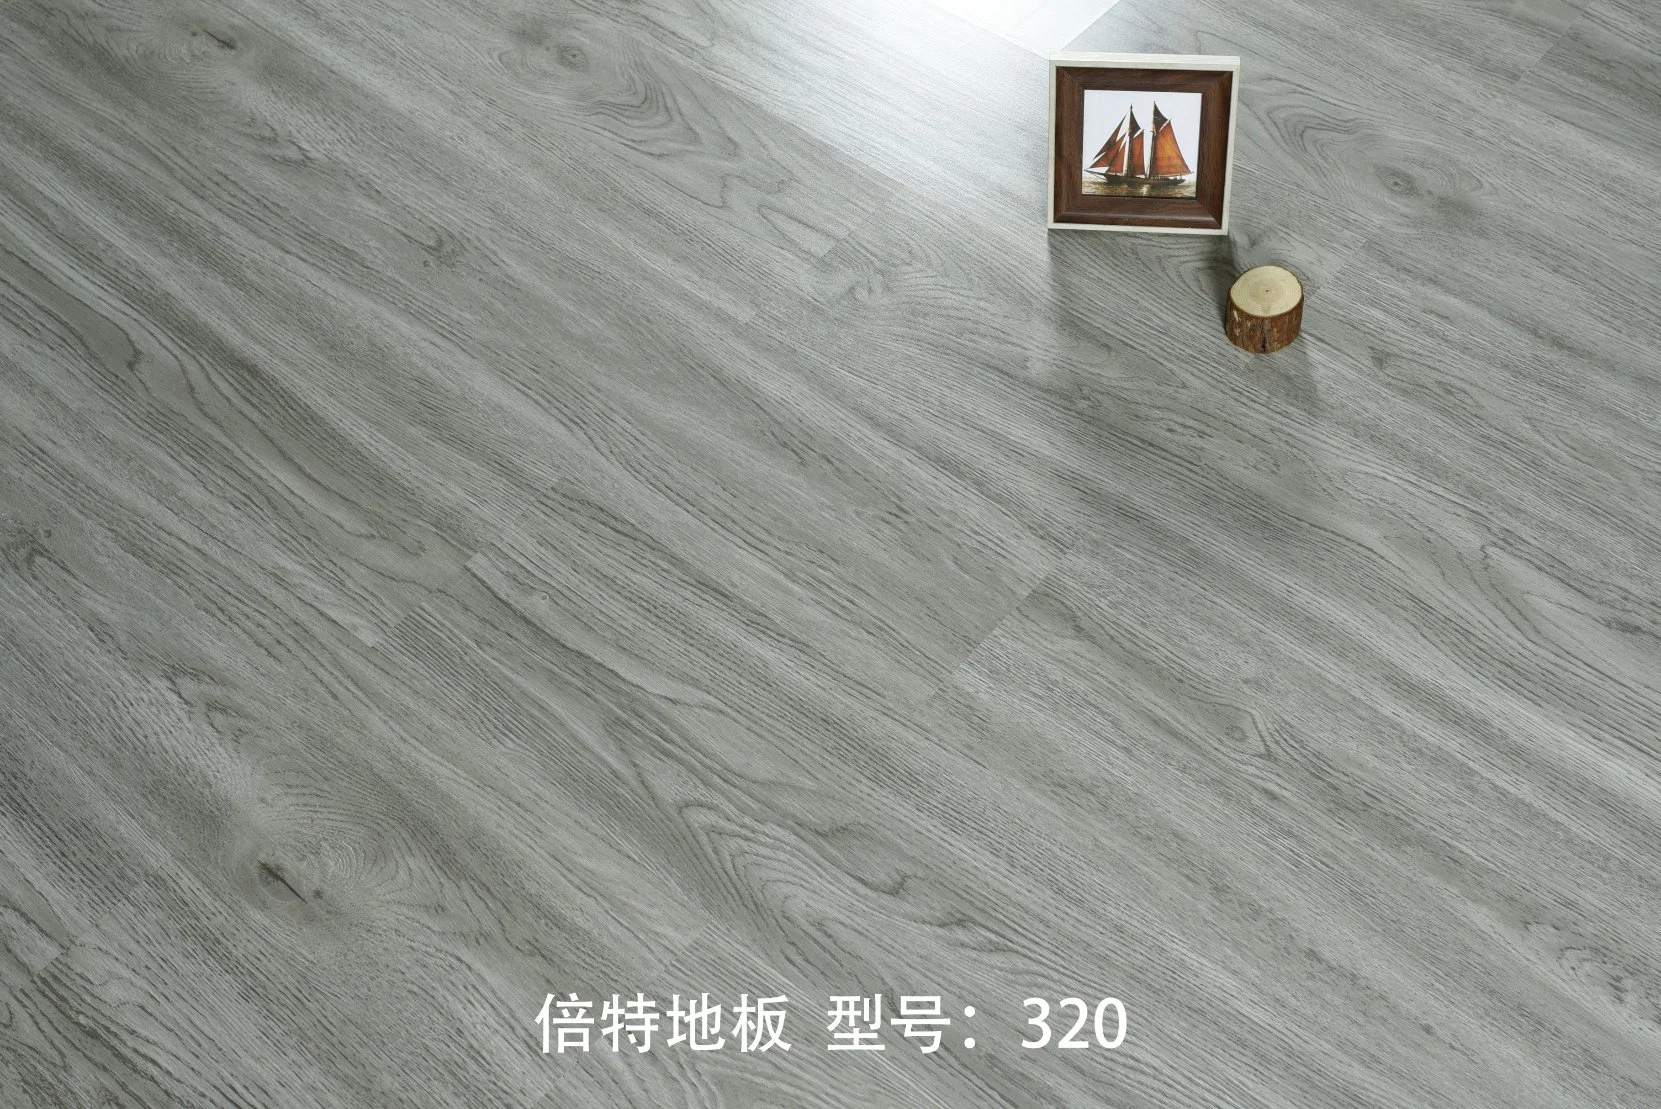 Wooden Flooring Luxury Texture Sale Simple Stone Wood Bead Ceramic Layer Style Surface Graphic Modern